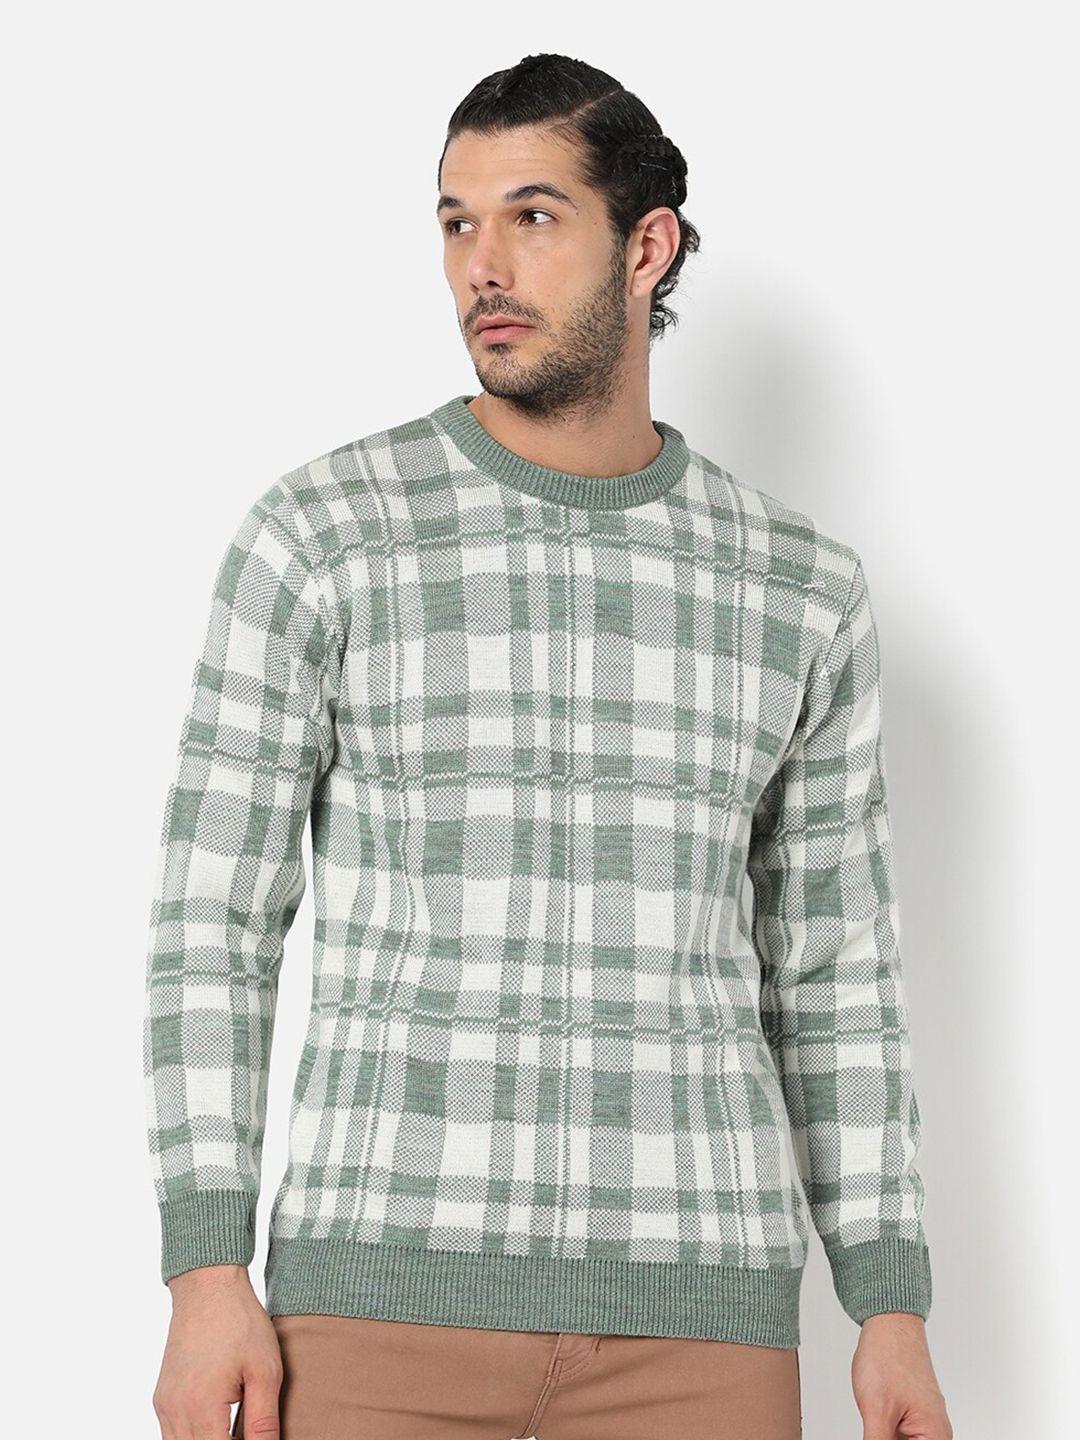 campus sutra men's sage green checked textured regular fit sweater for winter wear